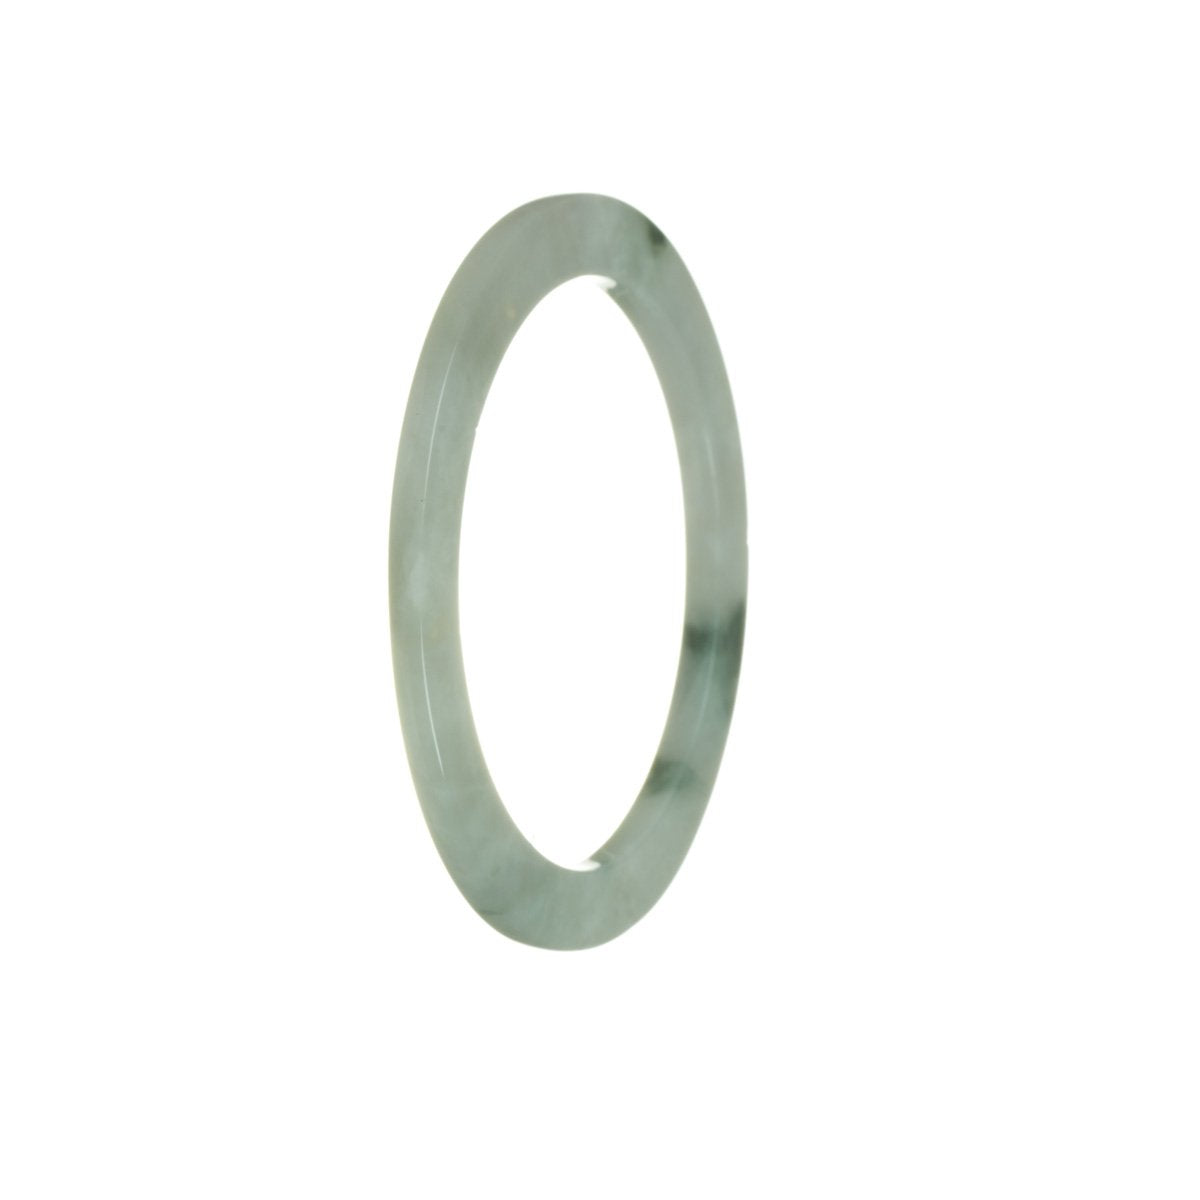 A close-up image of a delicate, 55mm thin bracelet made of certified natural flower jade. The bracelet features a beautiful, smooth green stone with unique patterns and is adorned with a subtle MAYS logo charm.